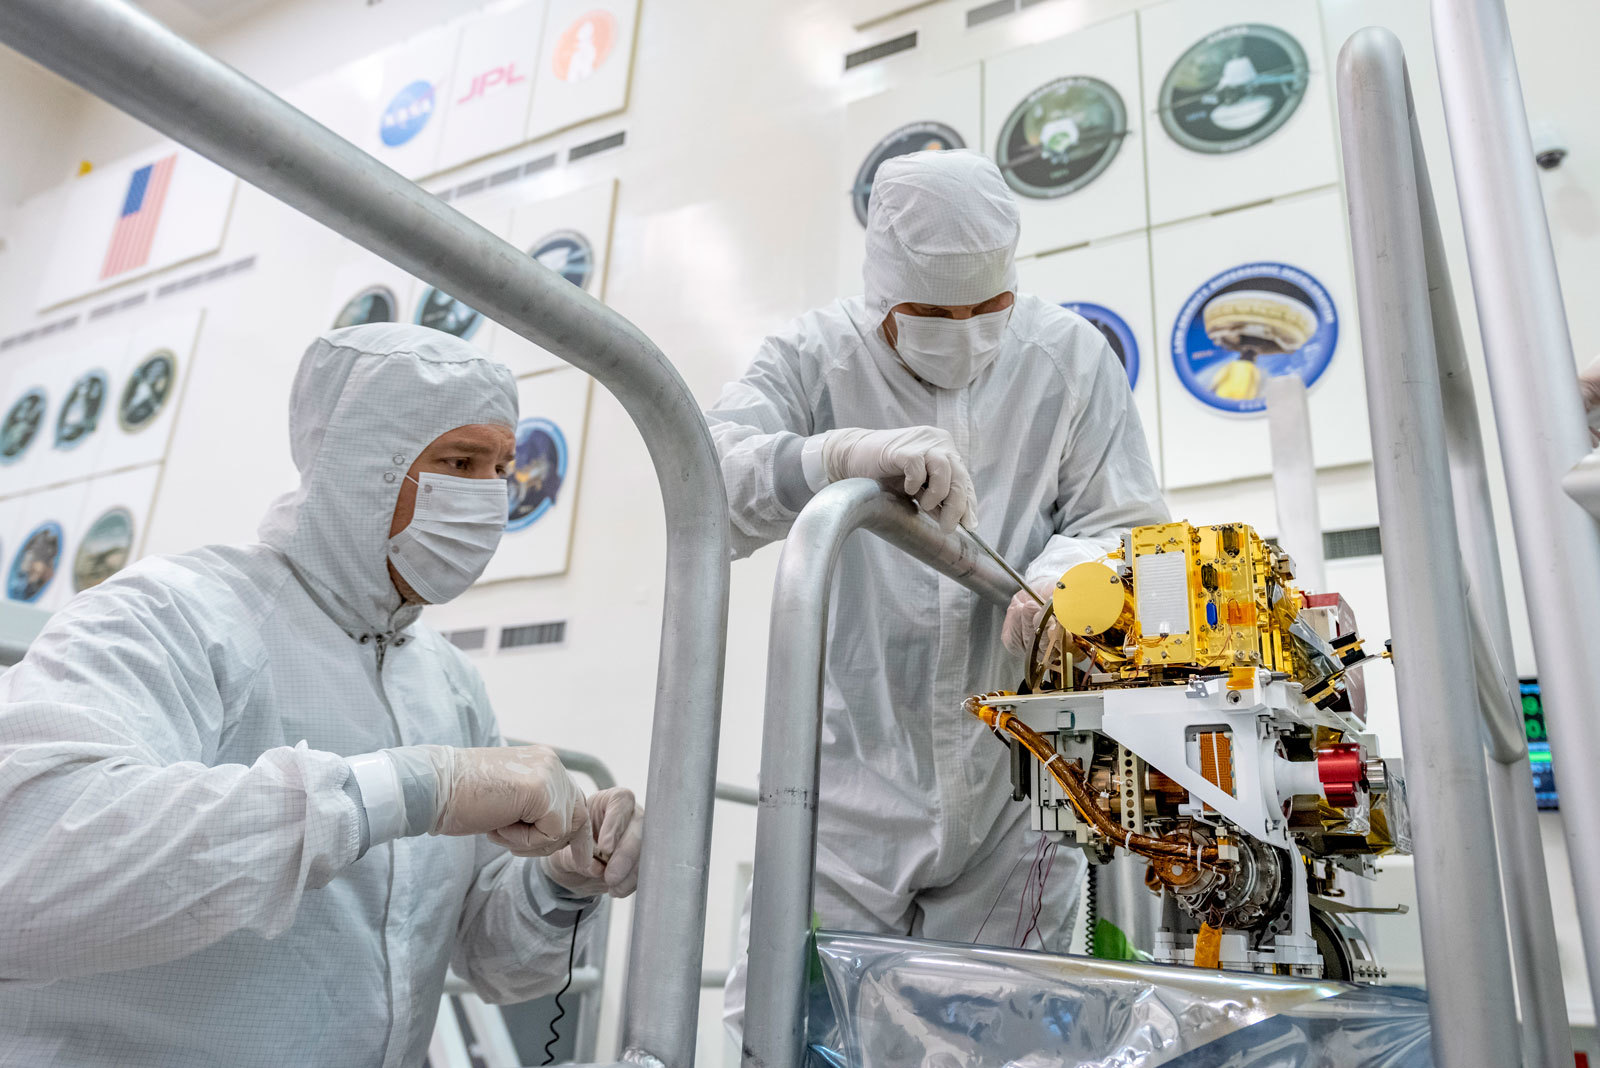 Engineers install the SuperCam instrument on Mars 2020's rover. This image was taken on June 25, 2019, in the Spacecraft Assembly Facility at NASA's Jet Propulsion Laboratory, Pasadena, California.